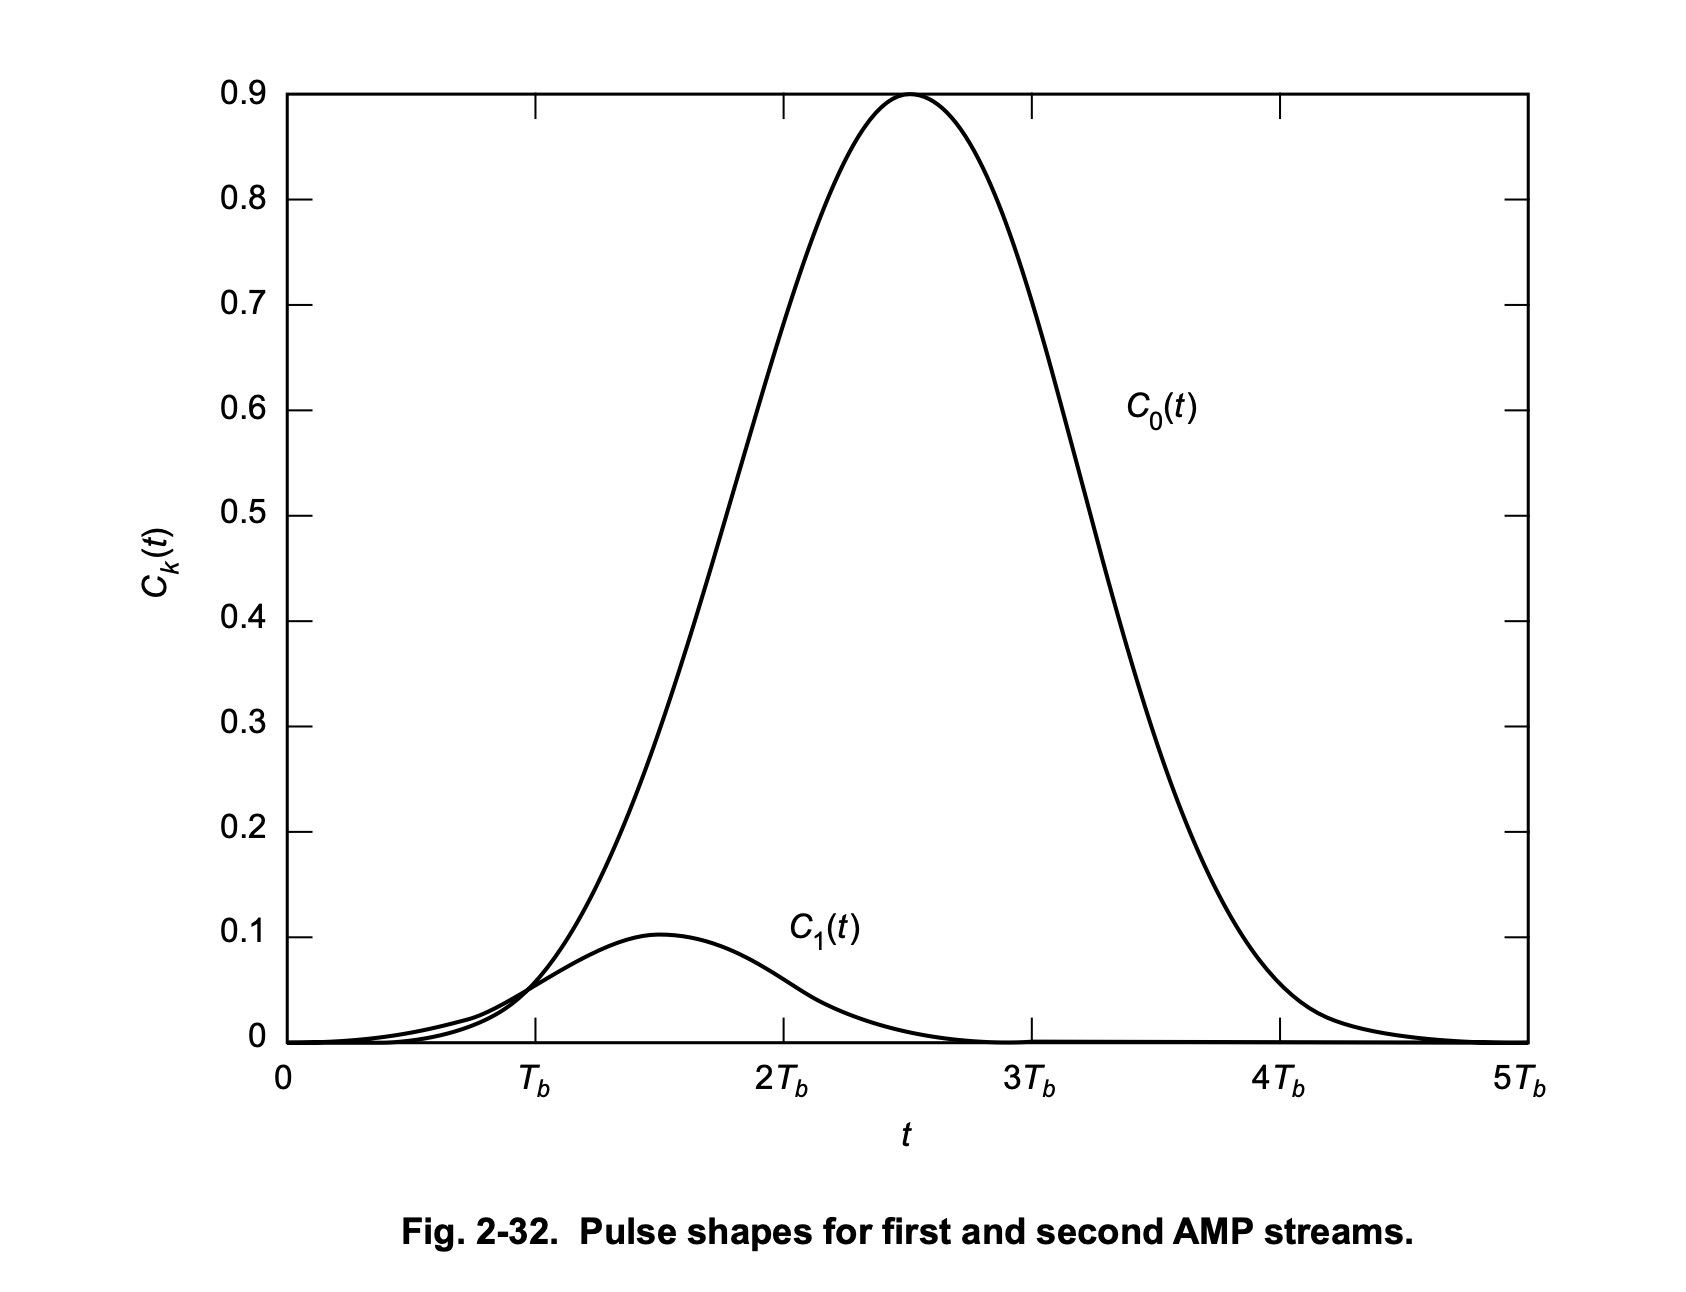 The two Laurent decomposition pulses for GMSK. Source: Page 74, Chapter 2, Volume 3, JPL DESCANSO Book Series